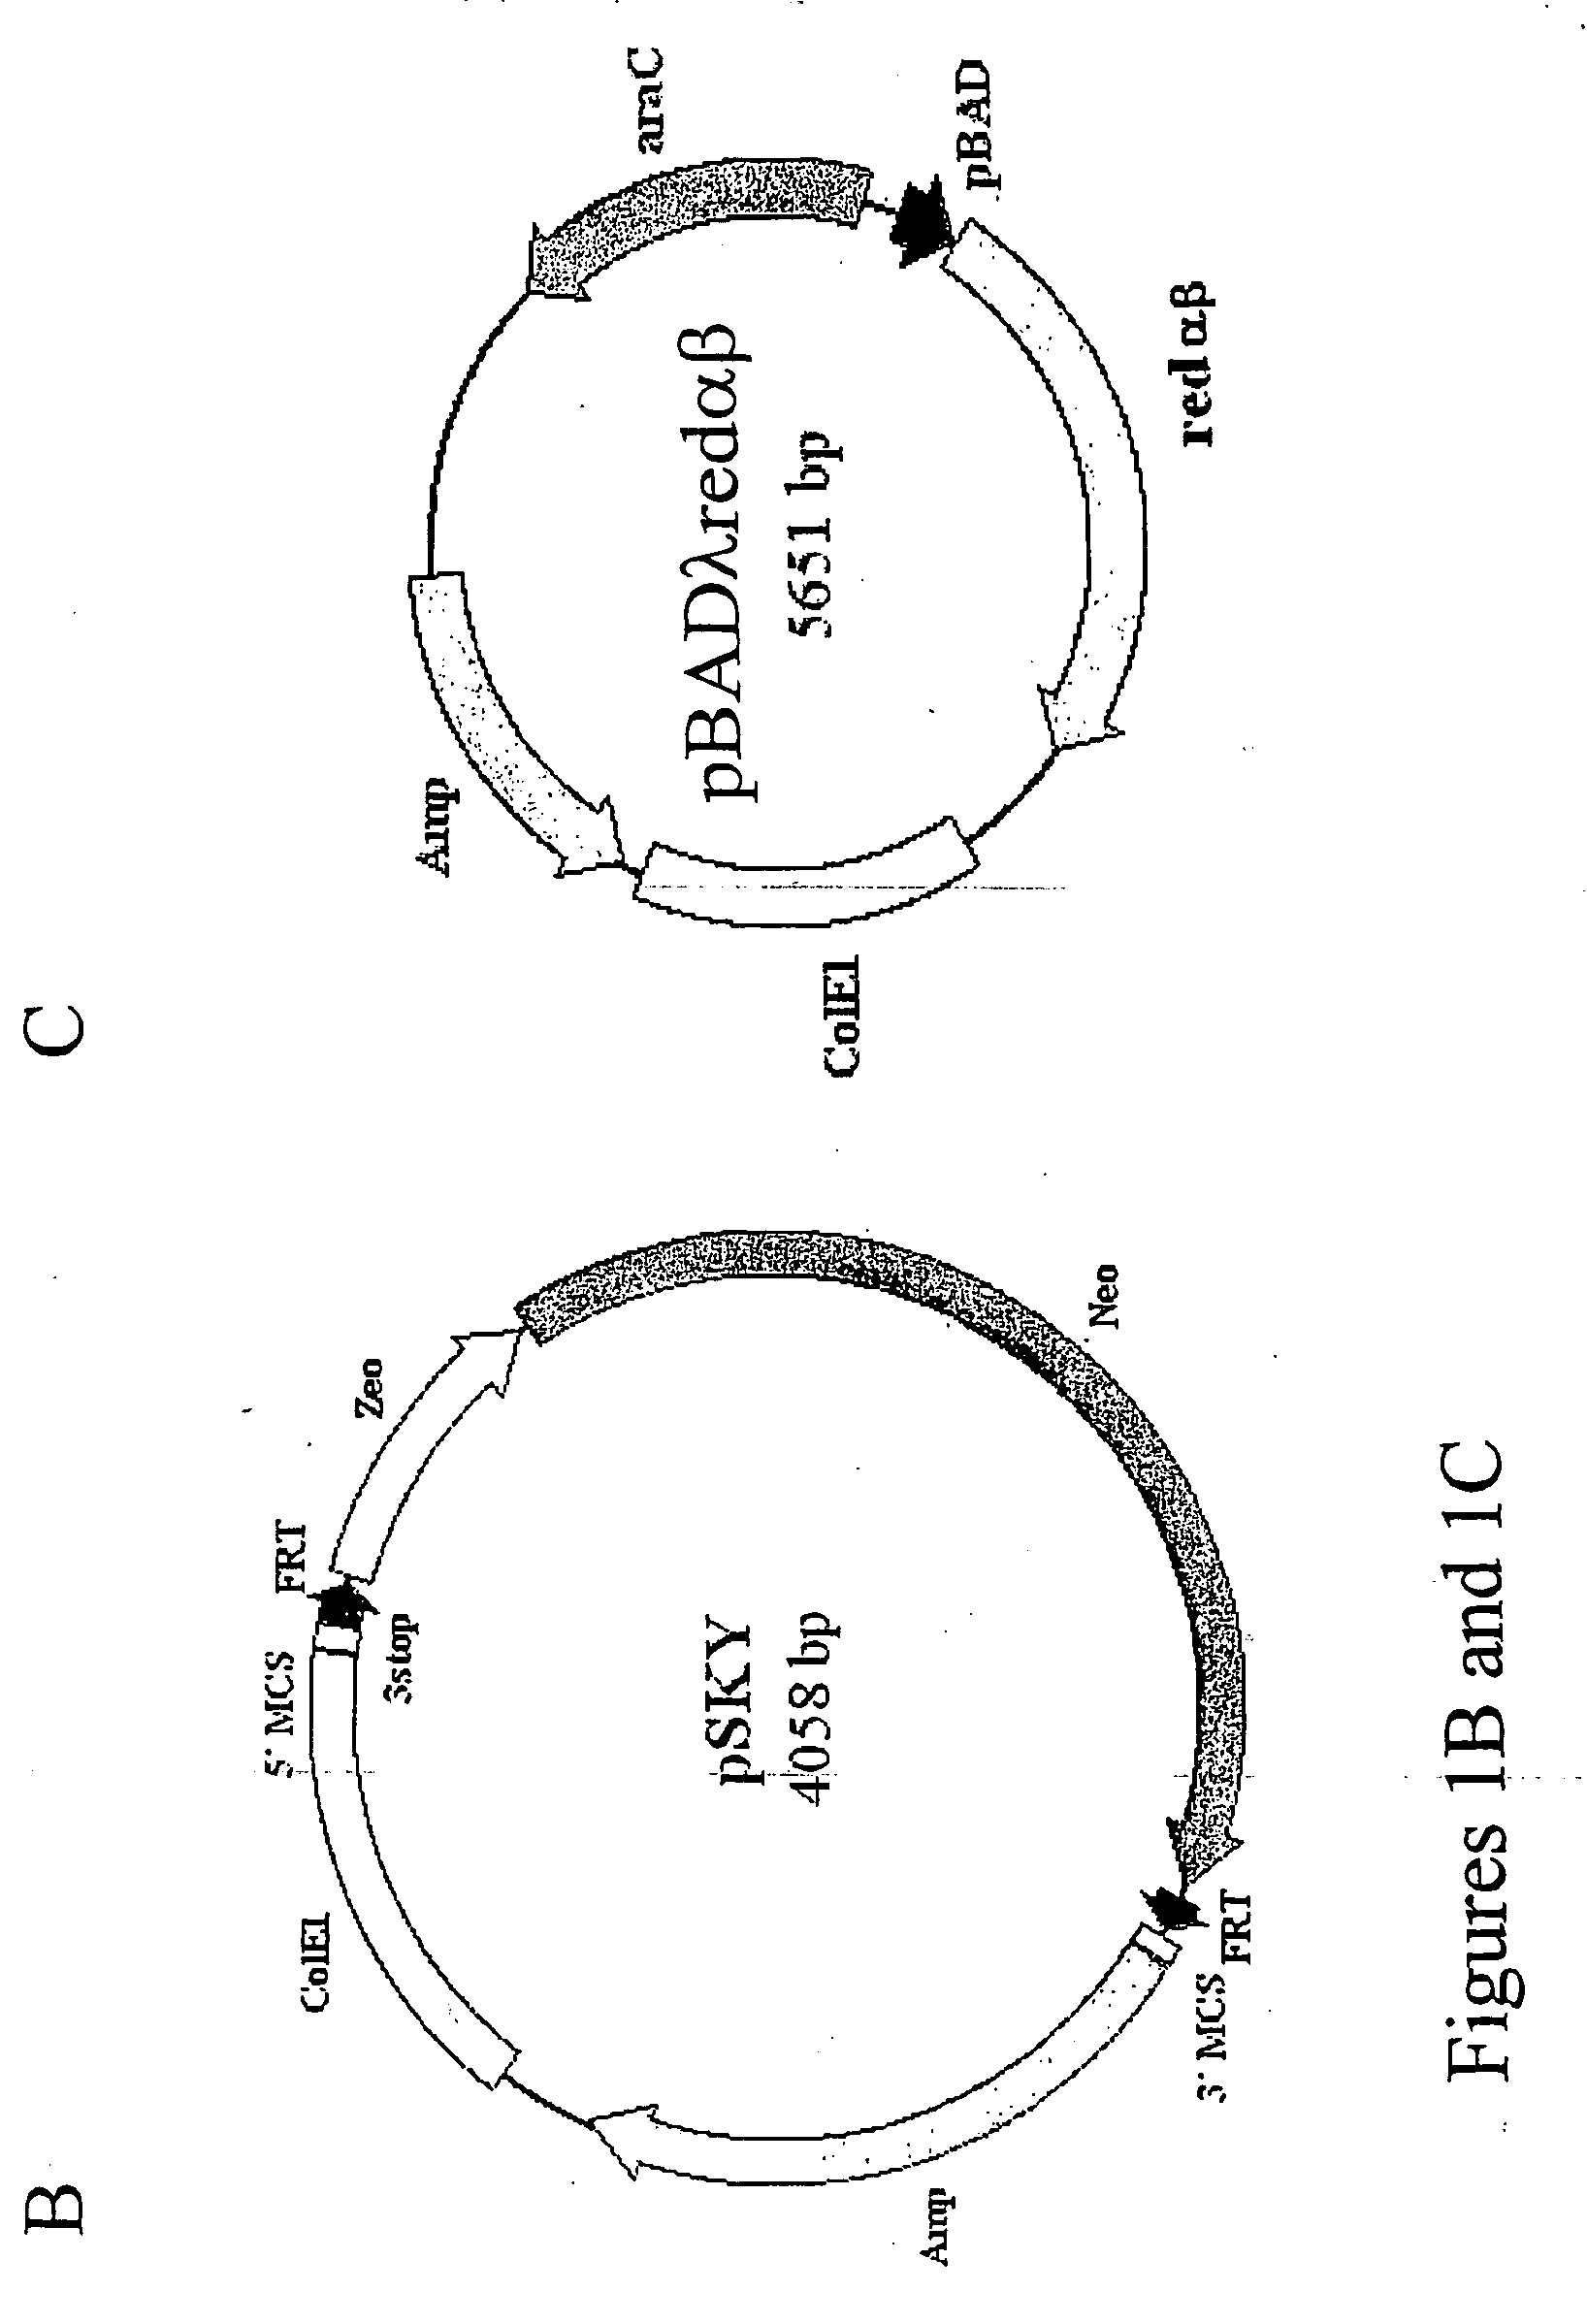 Methods for the production of cells and mammals with desired genetic modifications